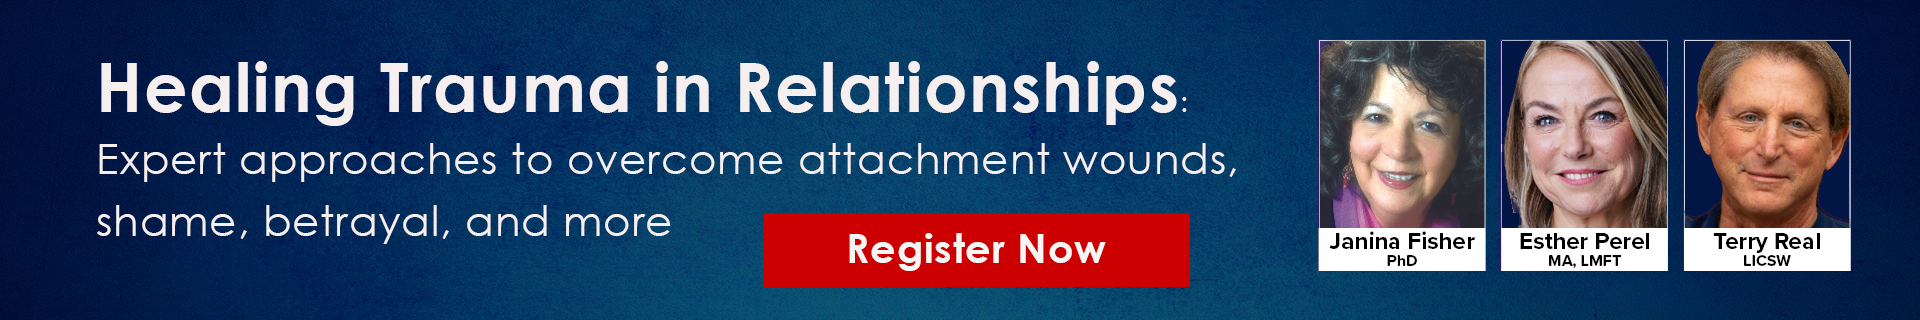 Healing Trauma in Relationships with Esther Perel, Janina Fisher, and Terry Real